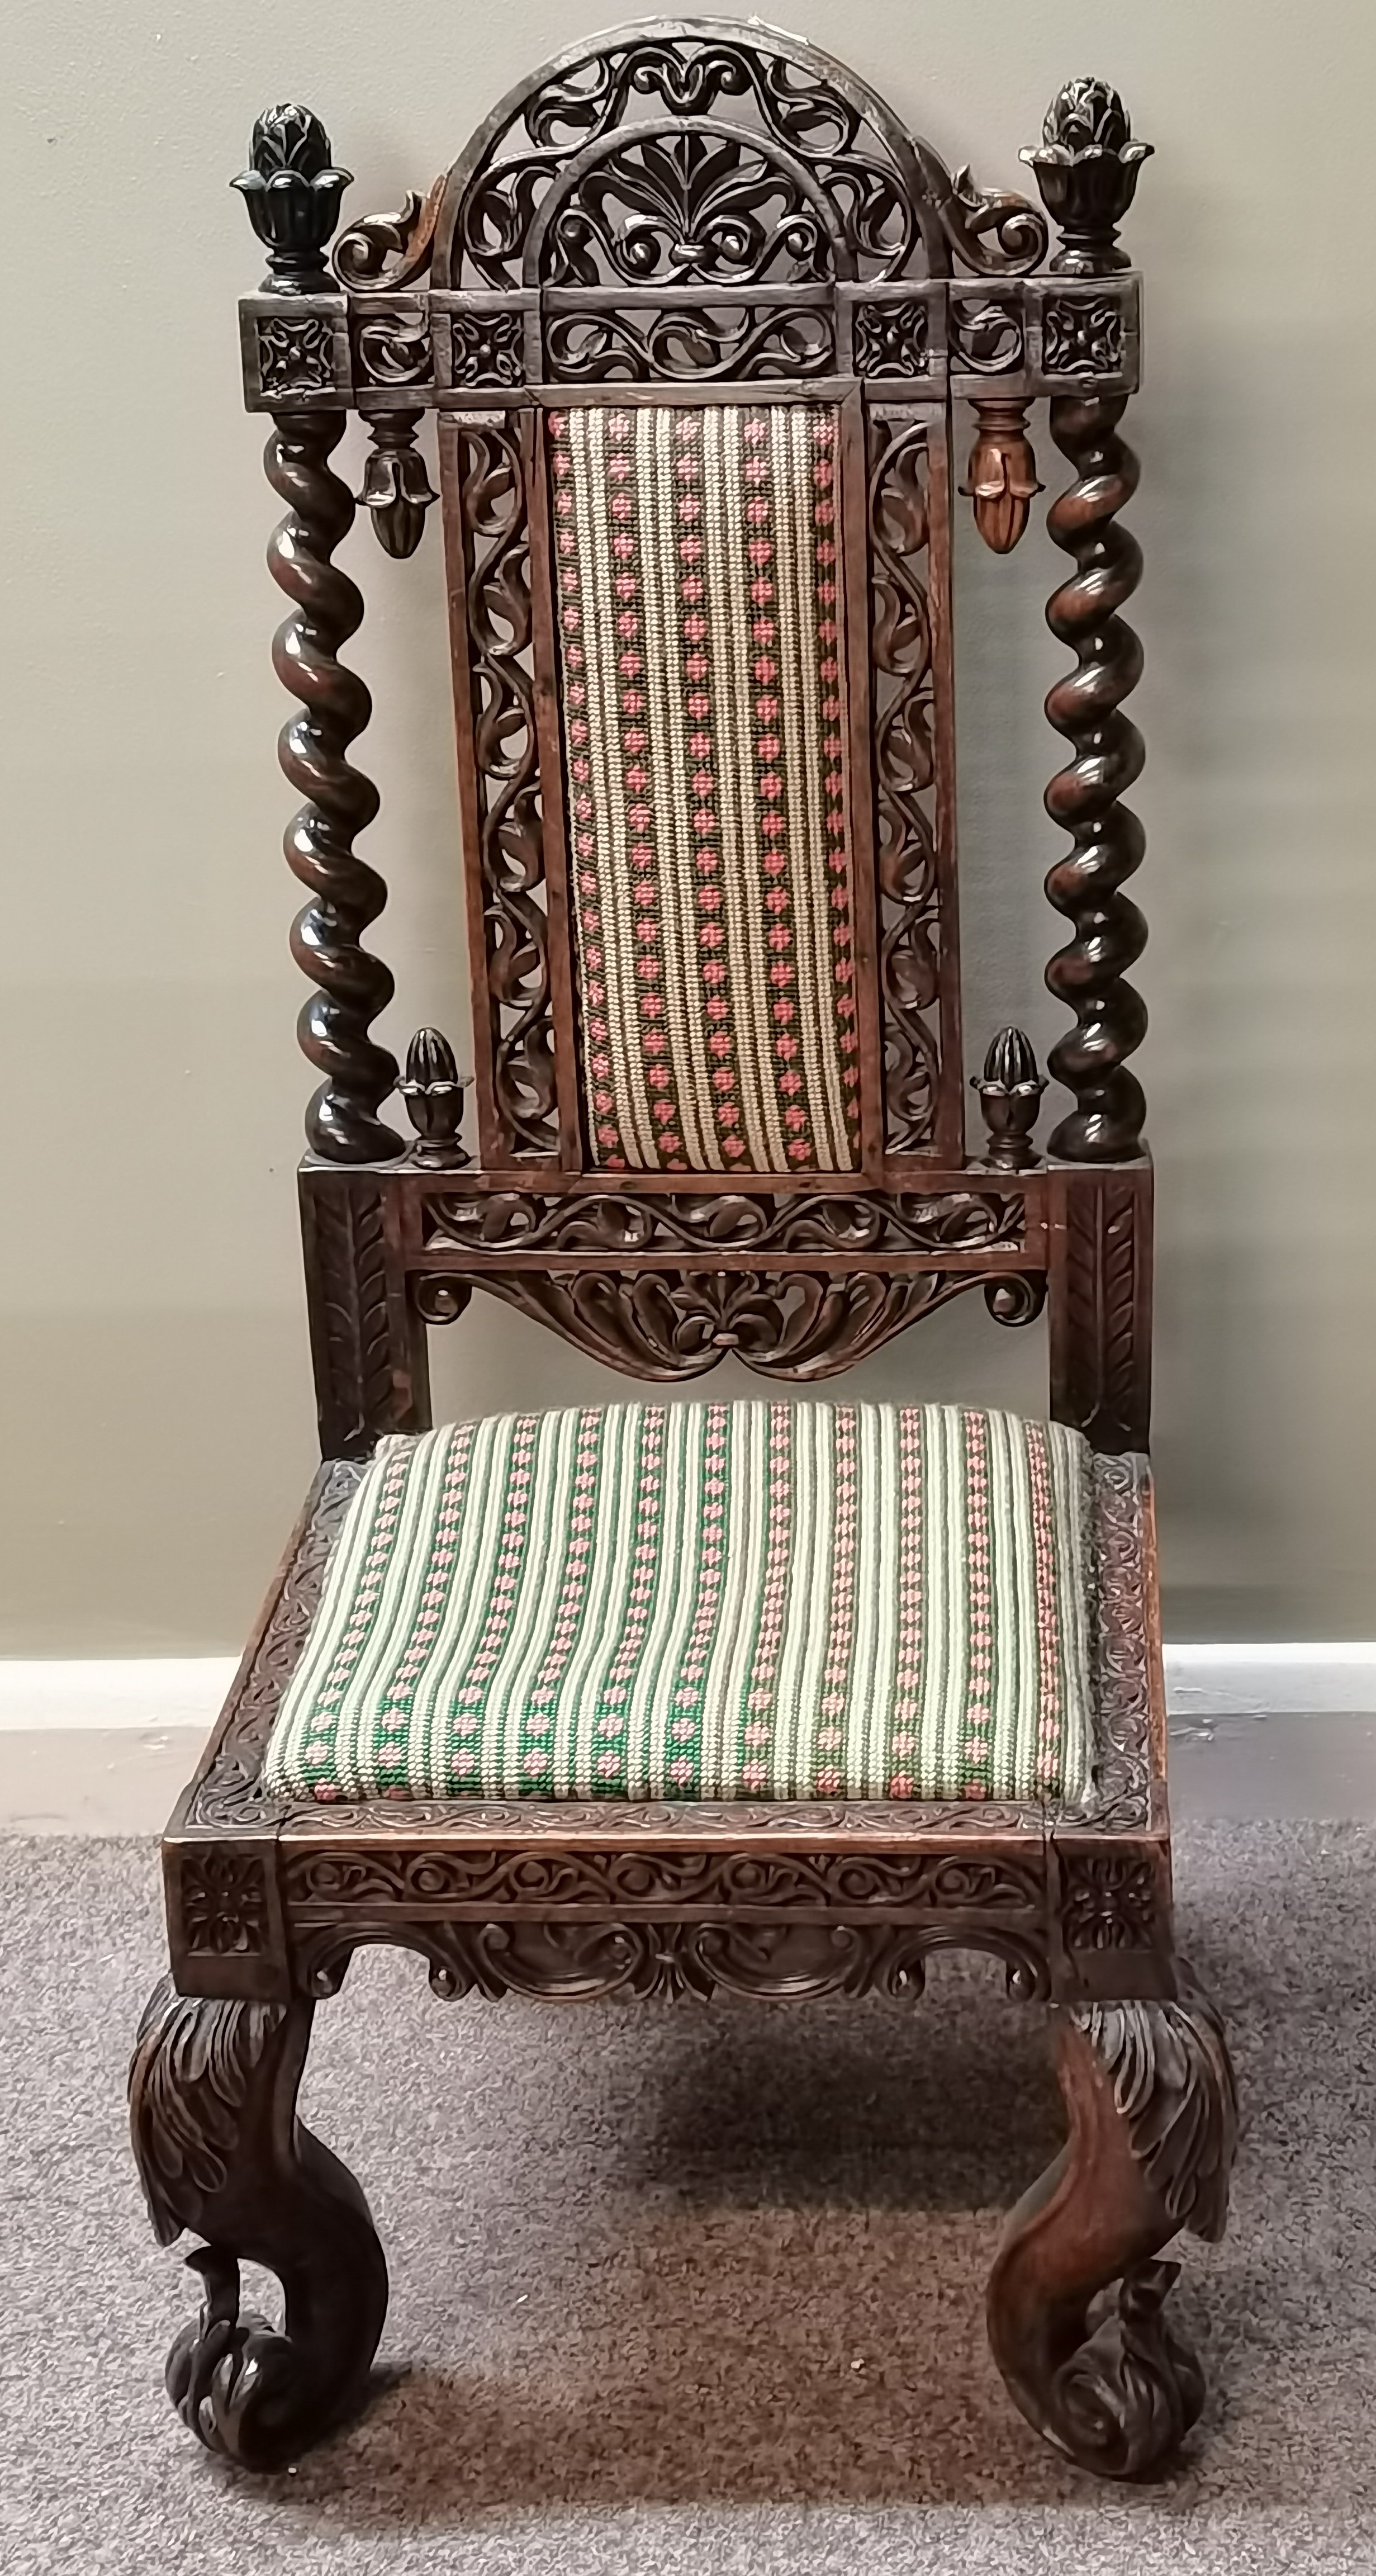 An Antique Anglo Indian Childs chair heavily carved with cabriole legs height 80cm